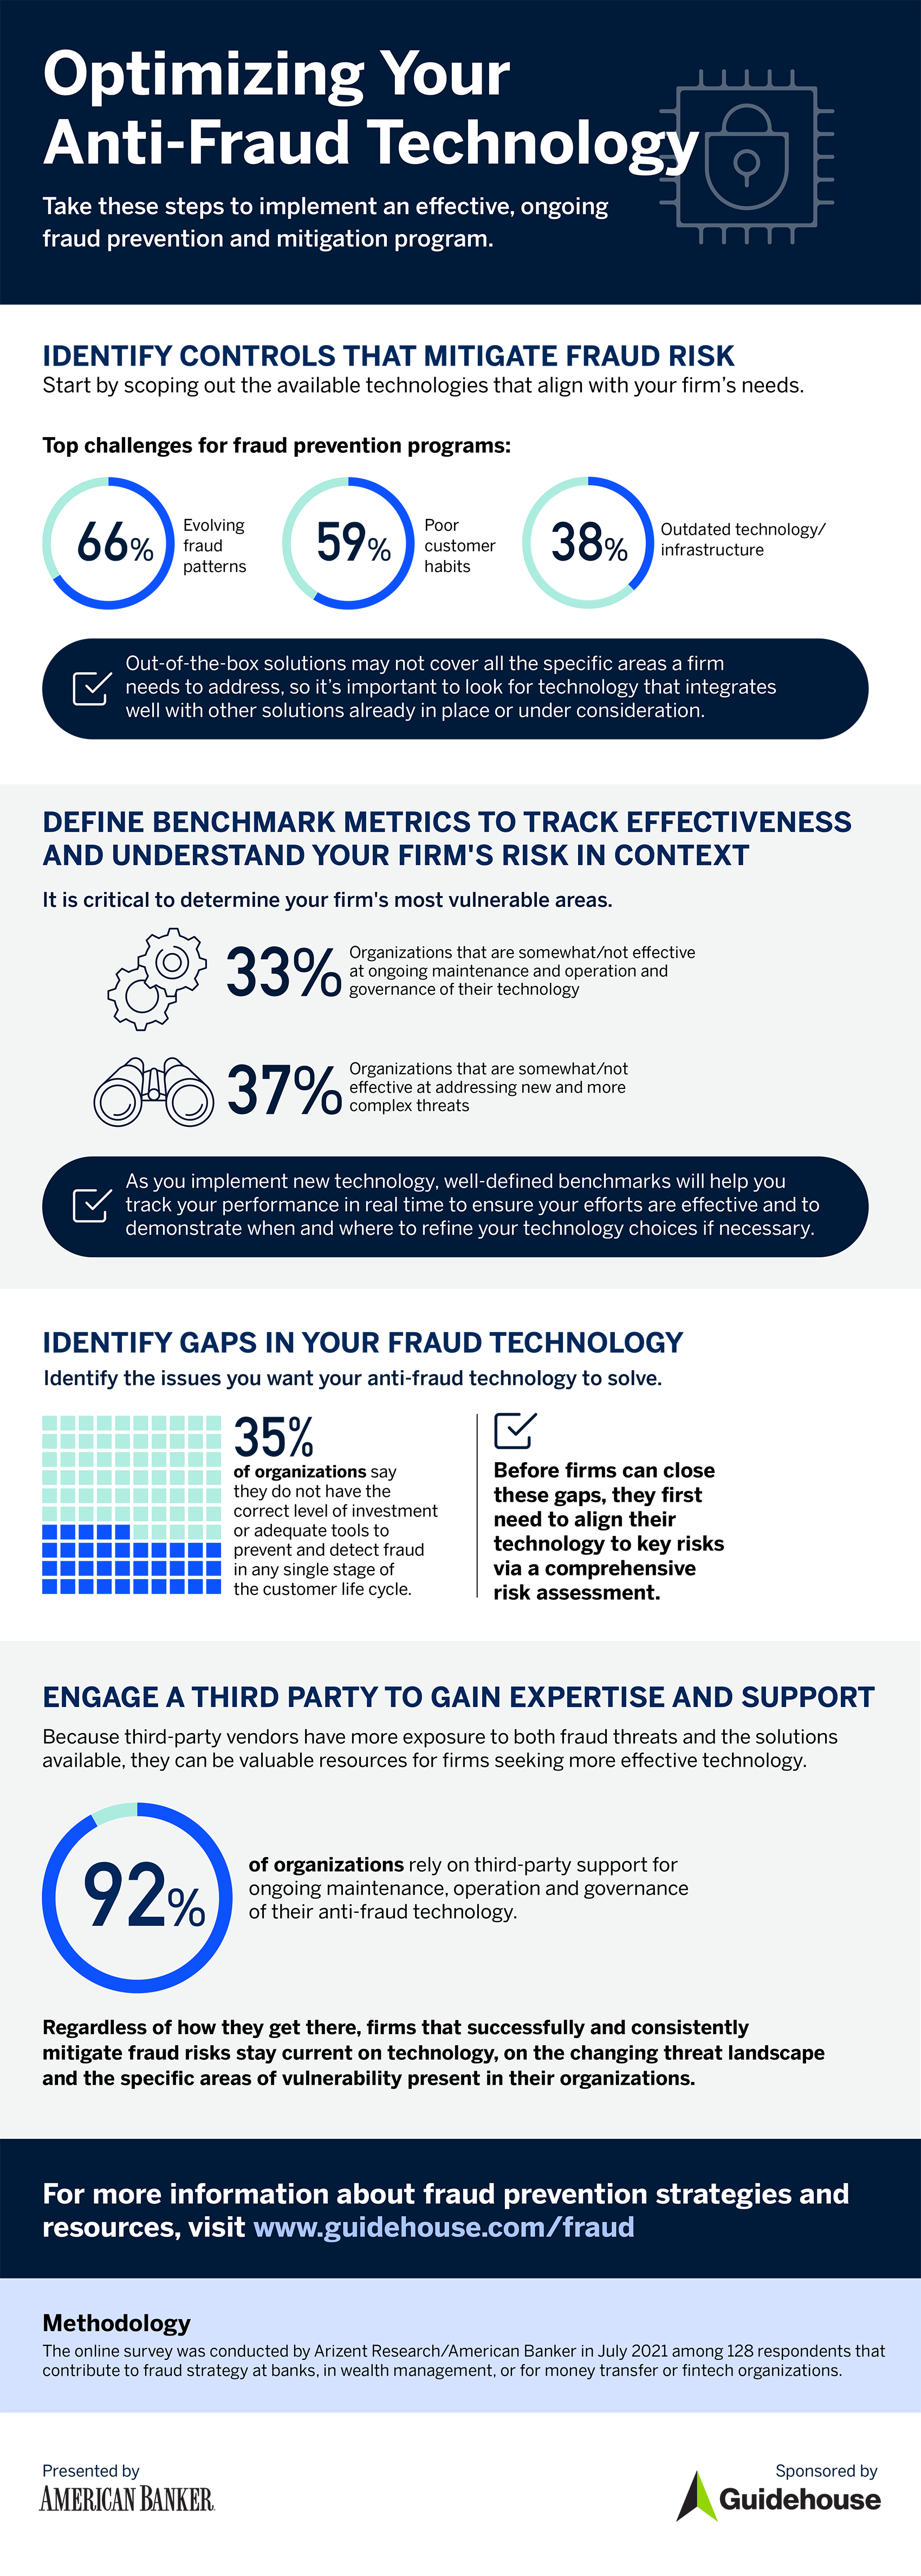 Don't Wait to Optimize Fraud Technology | Guidehouse and American Banker  Pulse Survey | Guidehouse